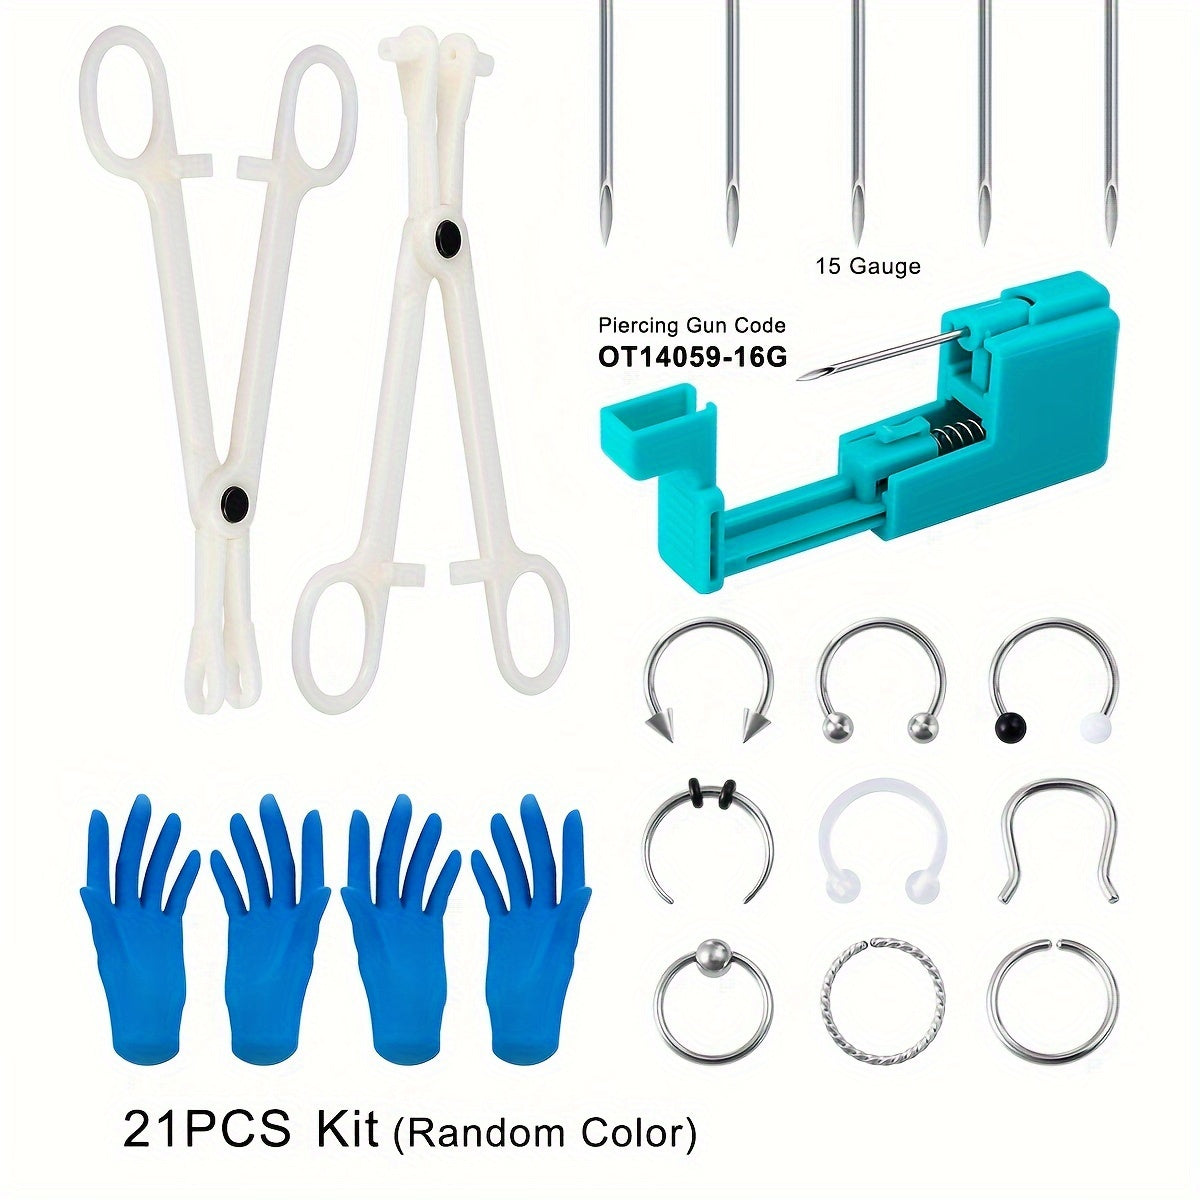 Body Piercing Jewelry Gun Tool Kit,Acrylic Piercing Pliers Clamp,Stainless Steel Piercing Needles Body Jewelry Ring Stud Hoop Barbell For Ear Lip Navel Tongue Nose Eyebrow,Blue Gloves,Kit Contains Quantities As Shown In The Picture